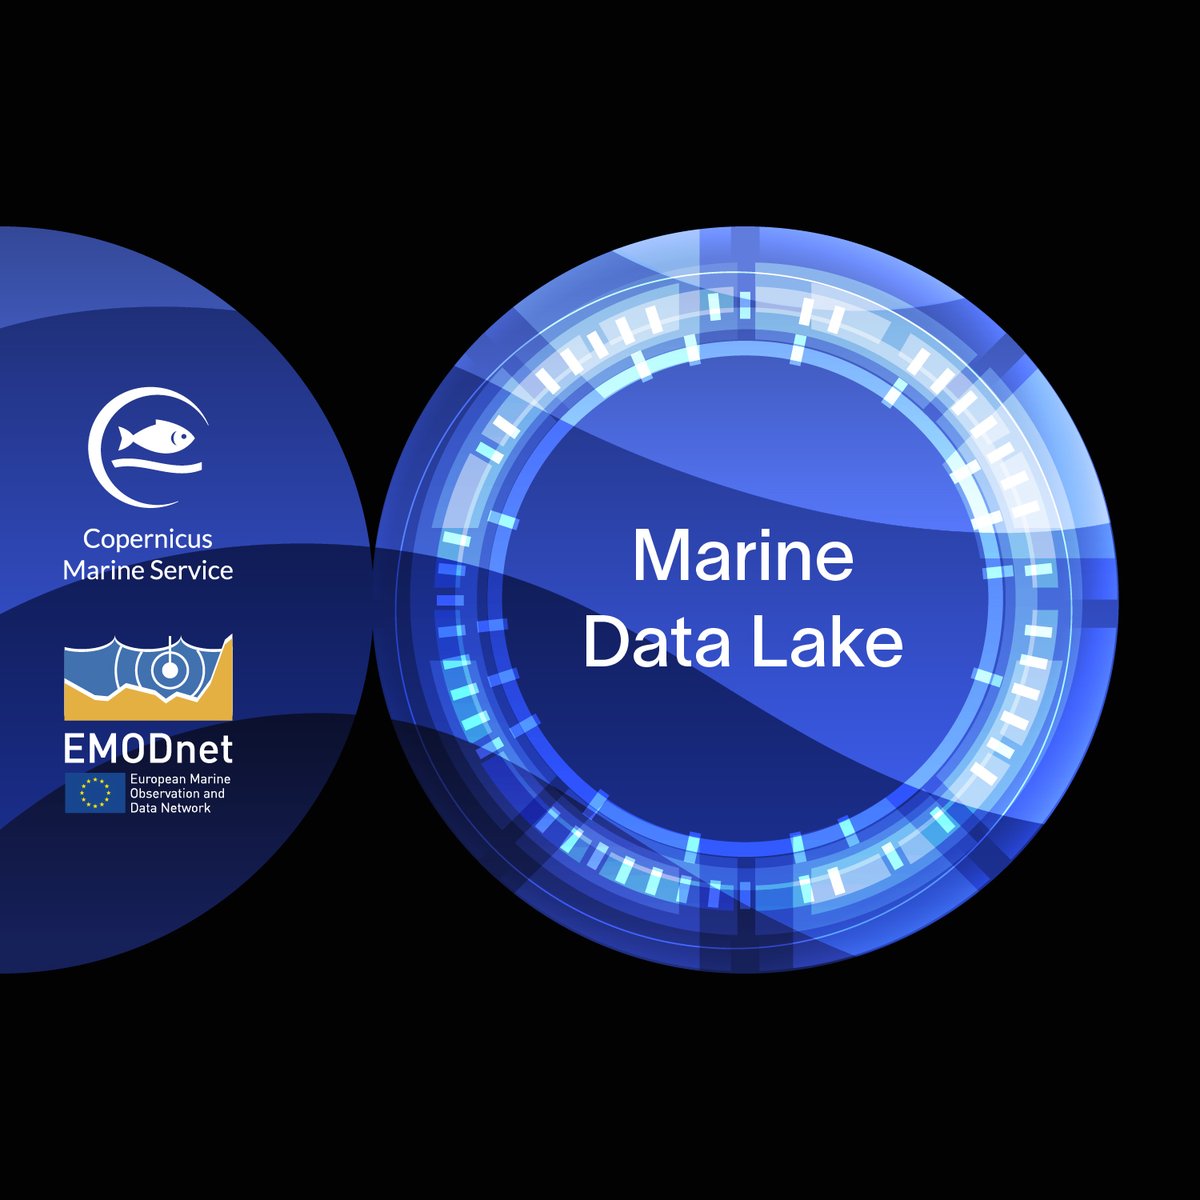 Dive into the world of #marinedata innovation with the #EDITO Data Lake! 🌊 This cloud-ready data lake will revolutionize ocean research & decision-making. Discover its vast storage capacity, high-speed connections & more: edito-infra.eu/news/what-is-a…  
#EDITOModelLab #EDITOInfra